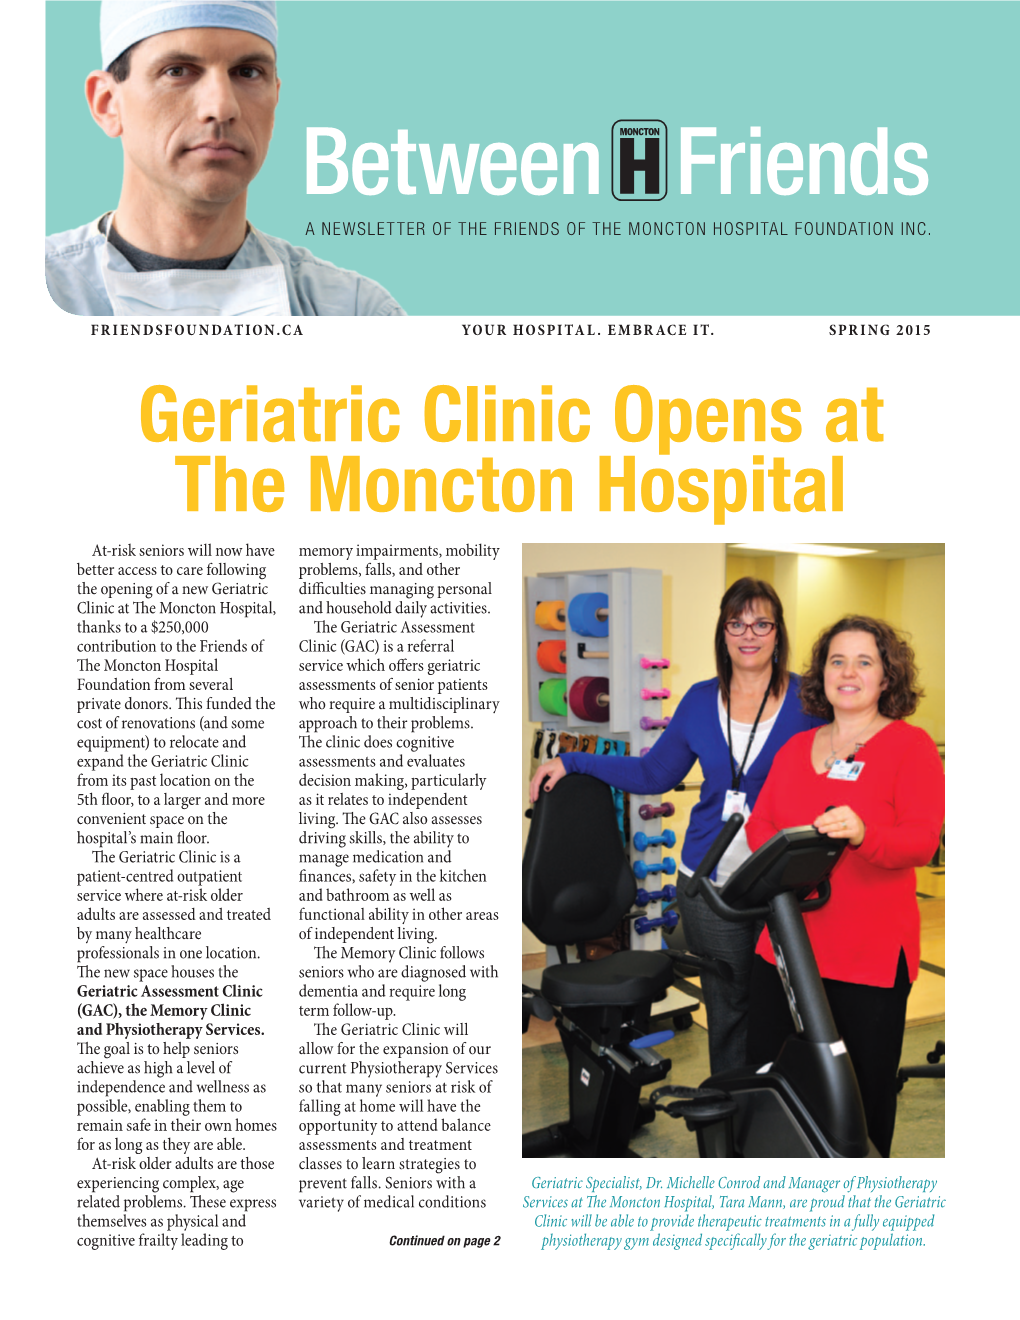 Between Friends a NEWSLETTER of the FRIENDS of the MONCTON HOSPITAL FOUNDATION INC